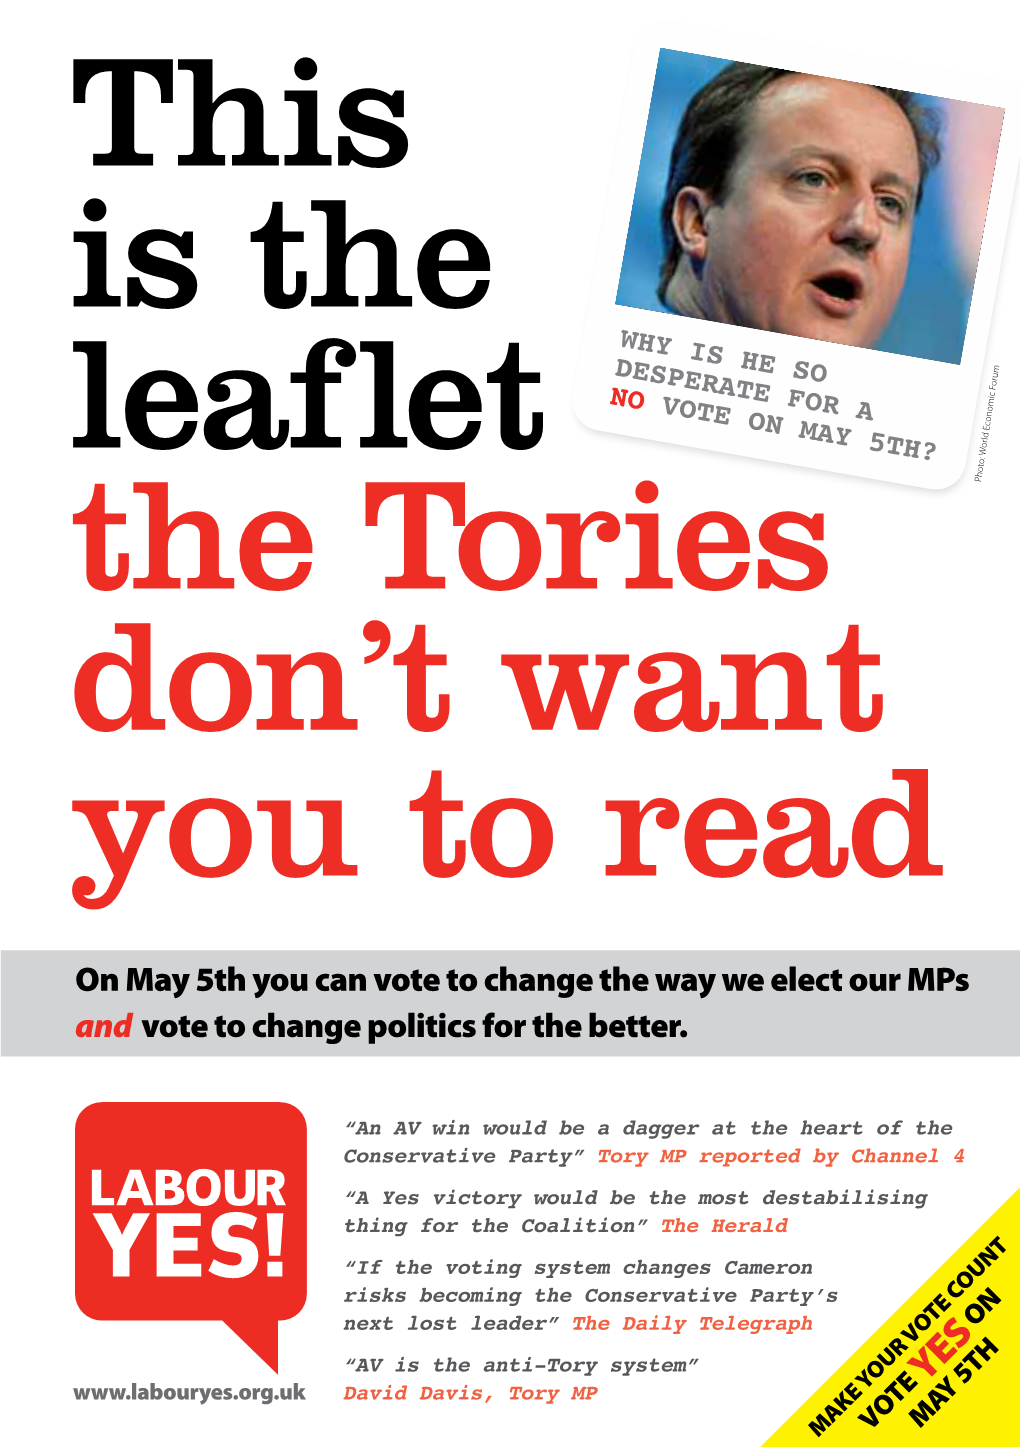 This Is the Leaflet the Tories Don't Want You to Read